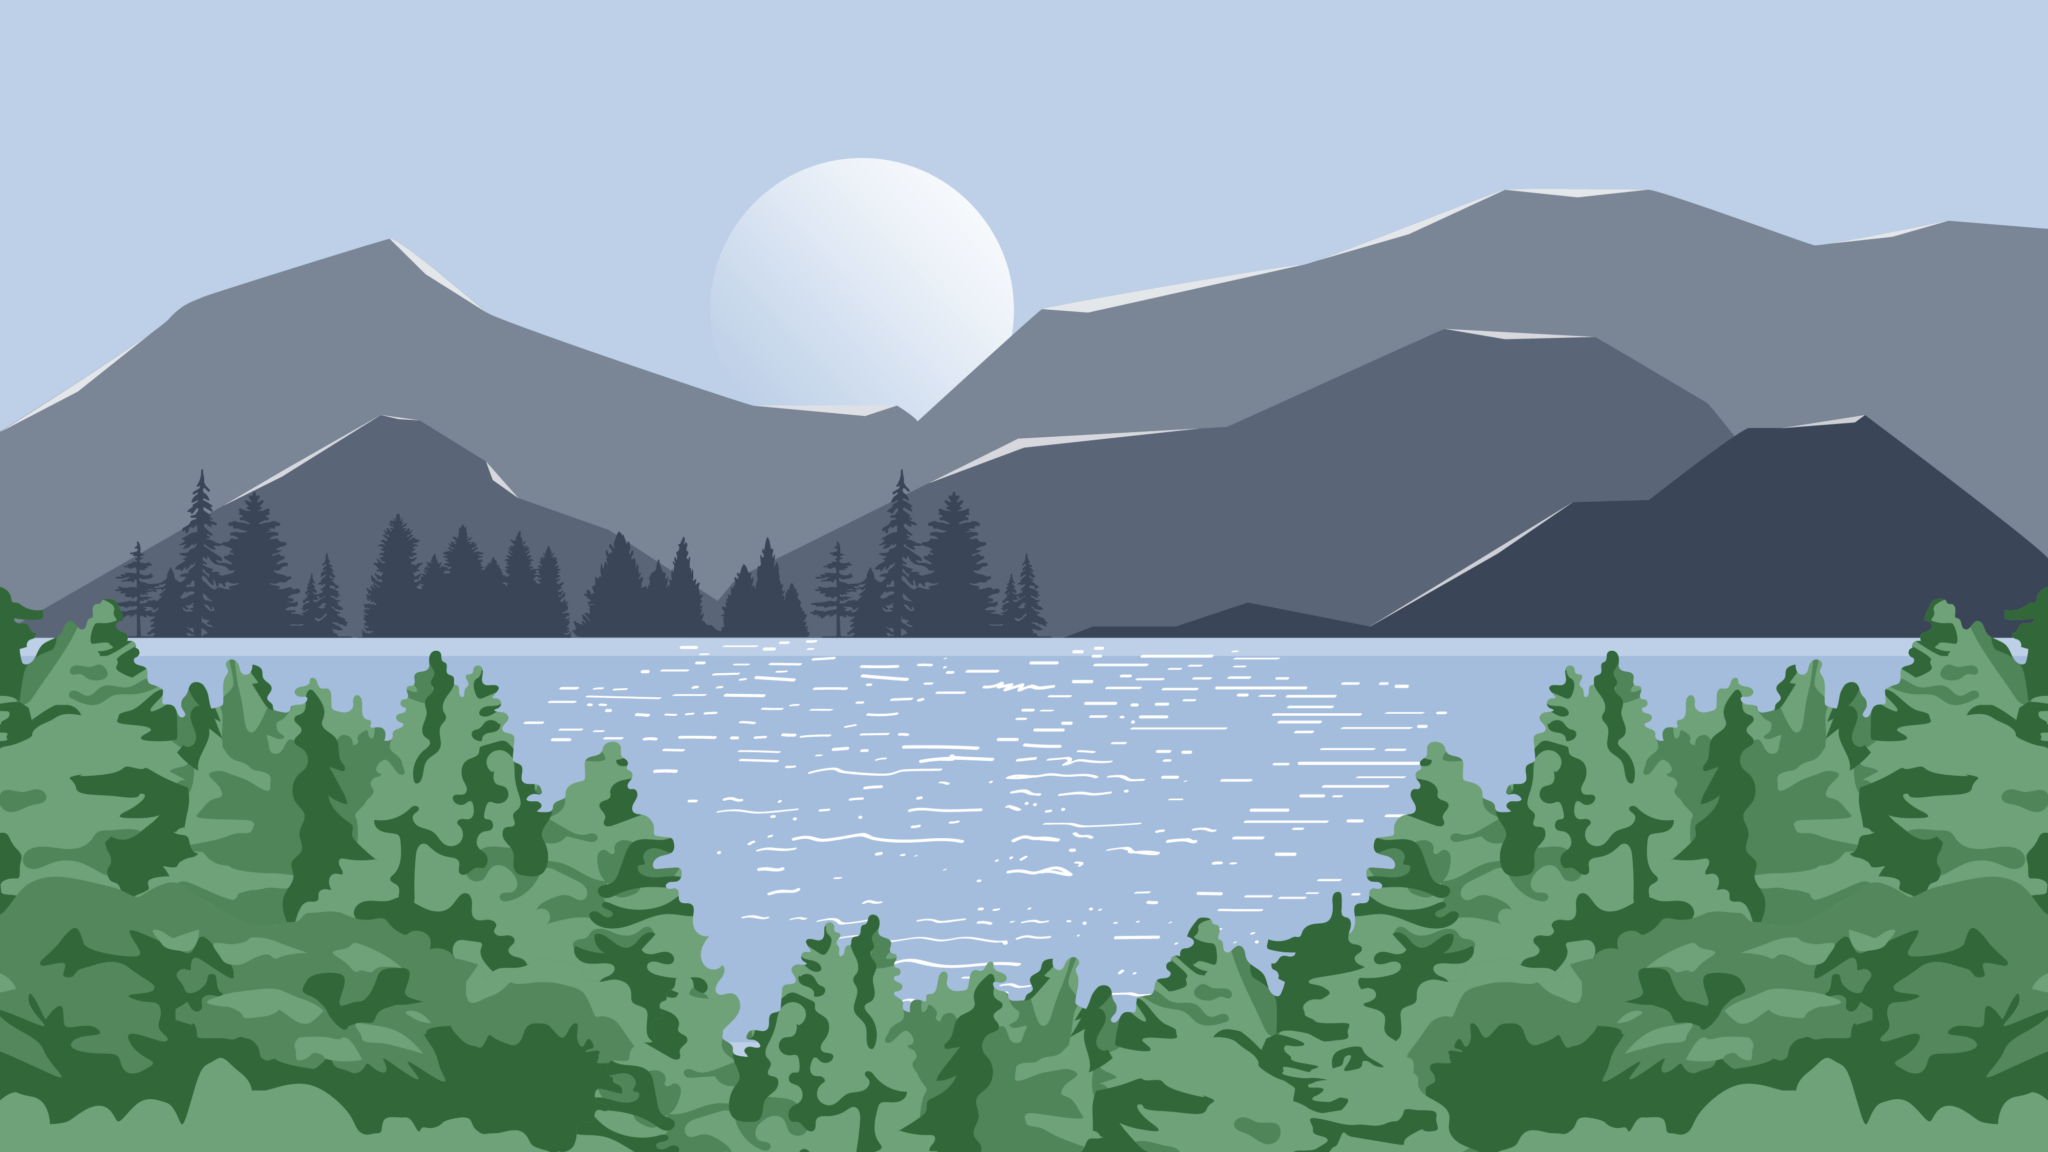 Illustration of pine trees, a lake, and mountains in Breckenridge, Colorado